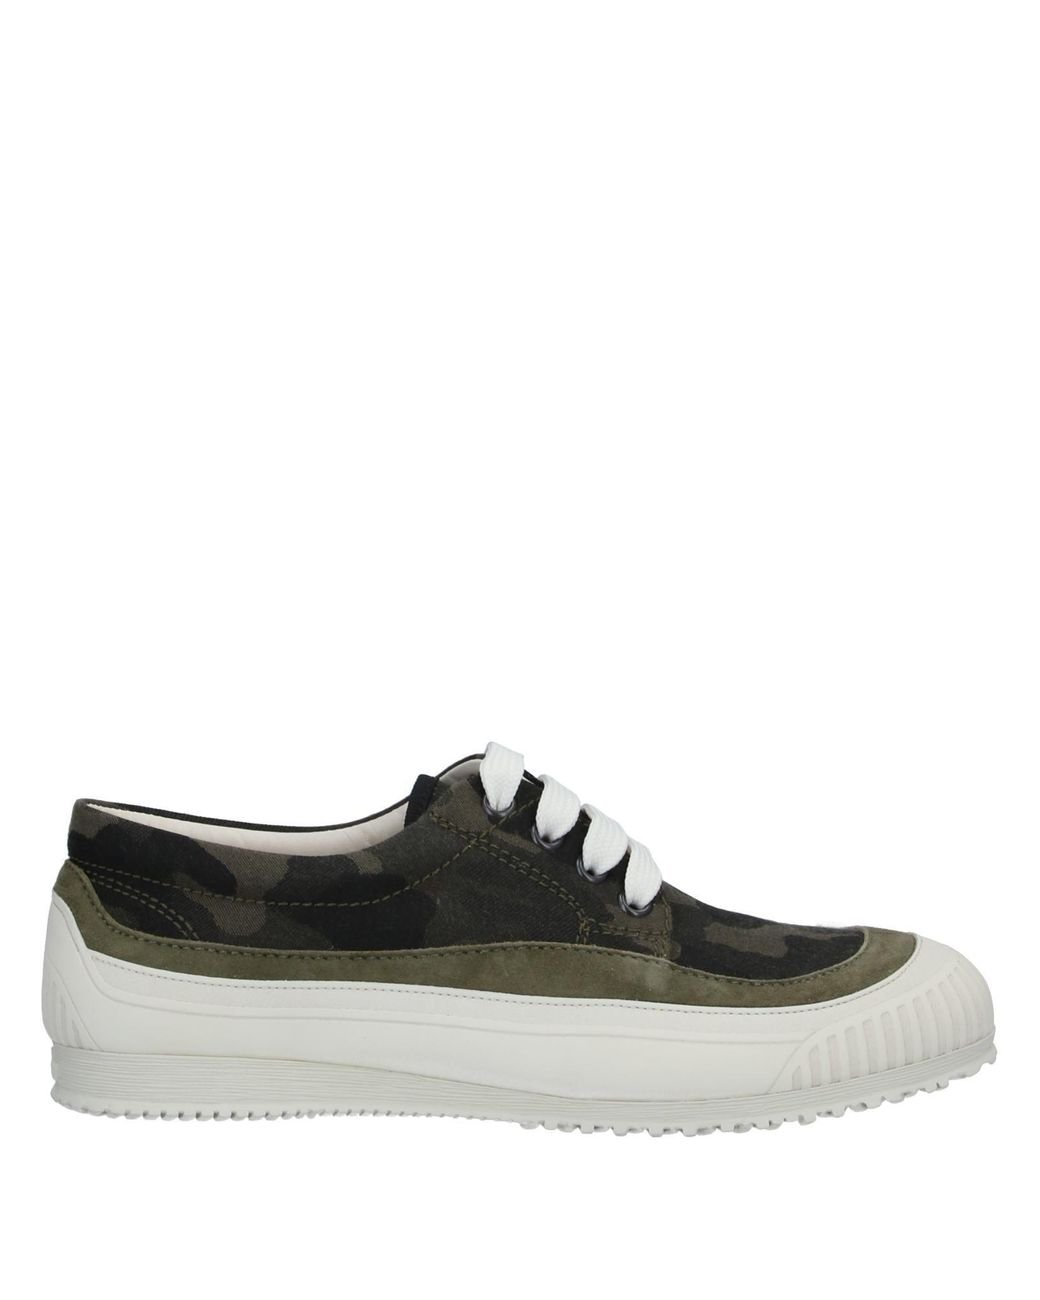 Hogan Suede Low-tops & Sneakers in Military Green (Green) - Lyst